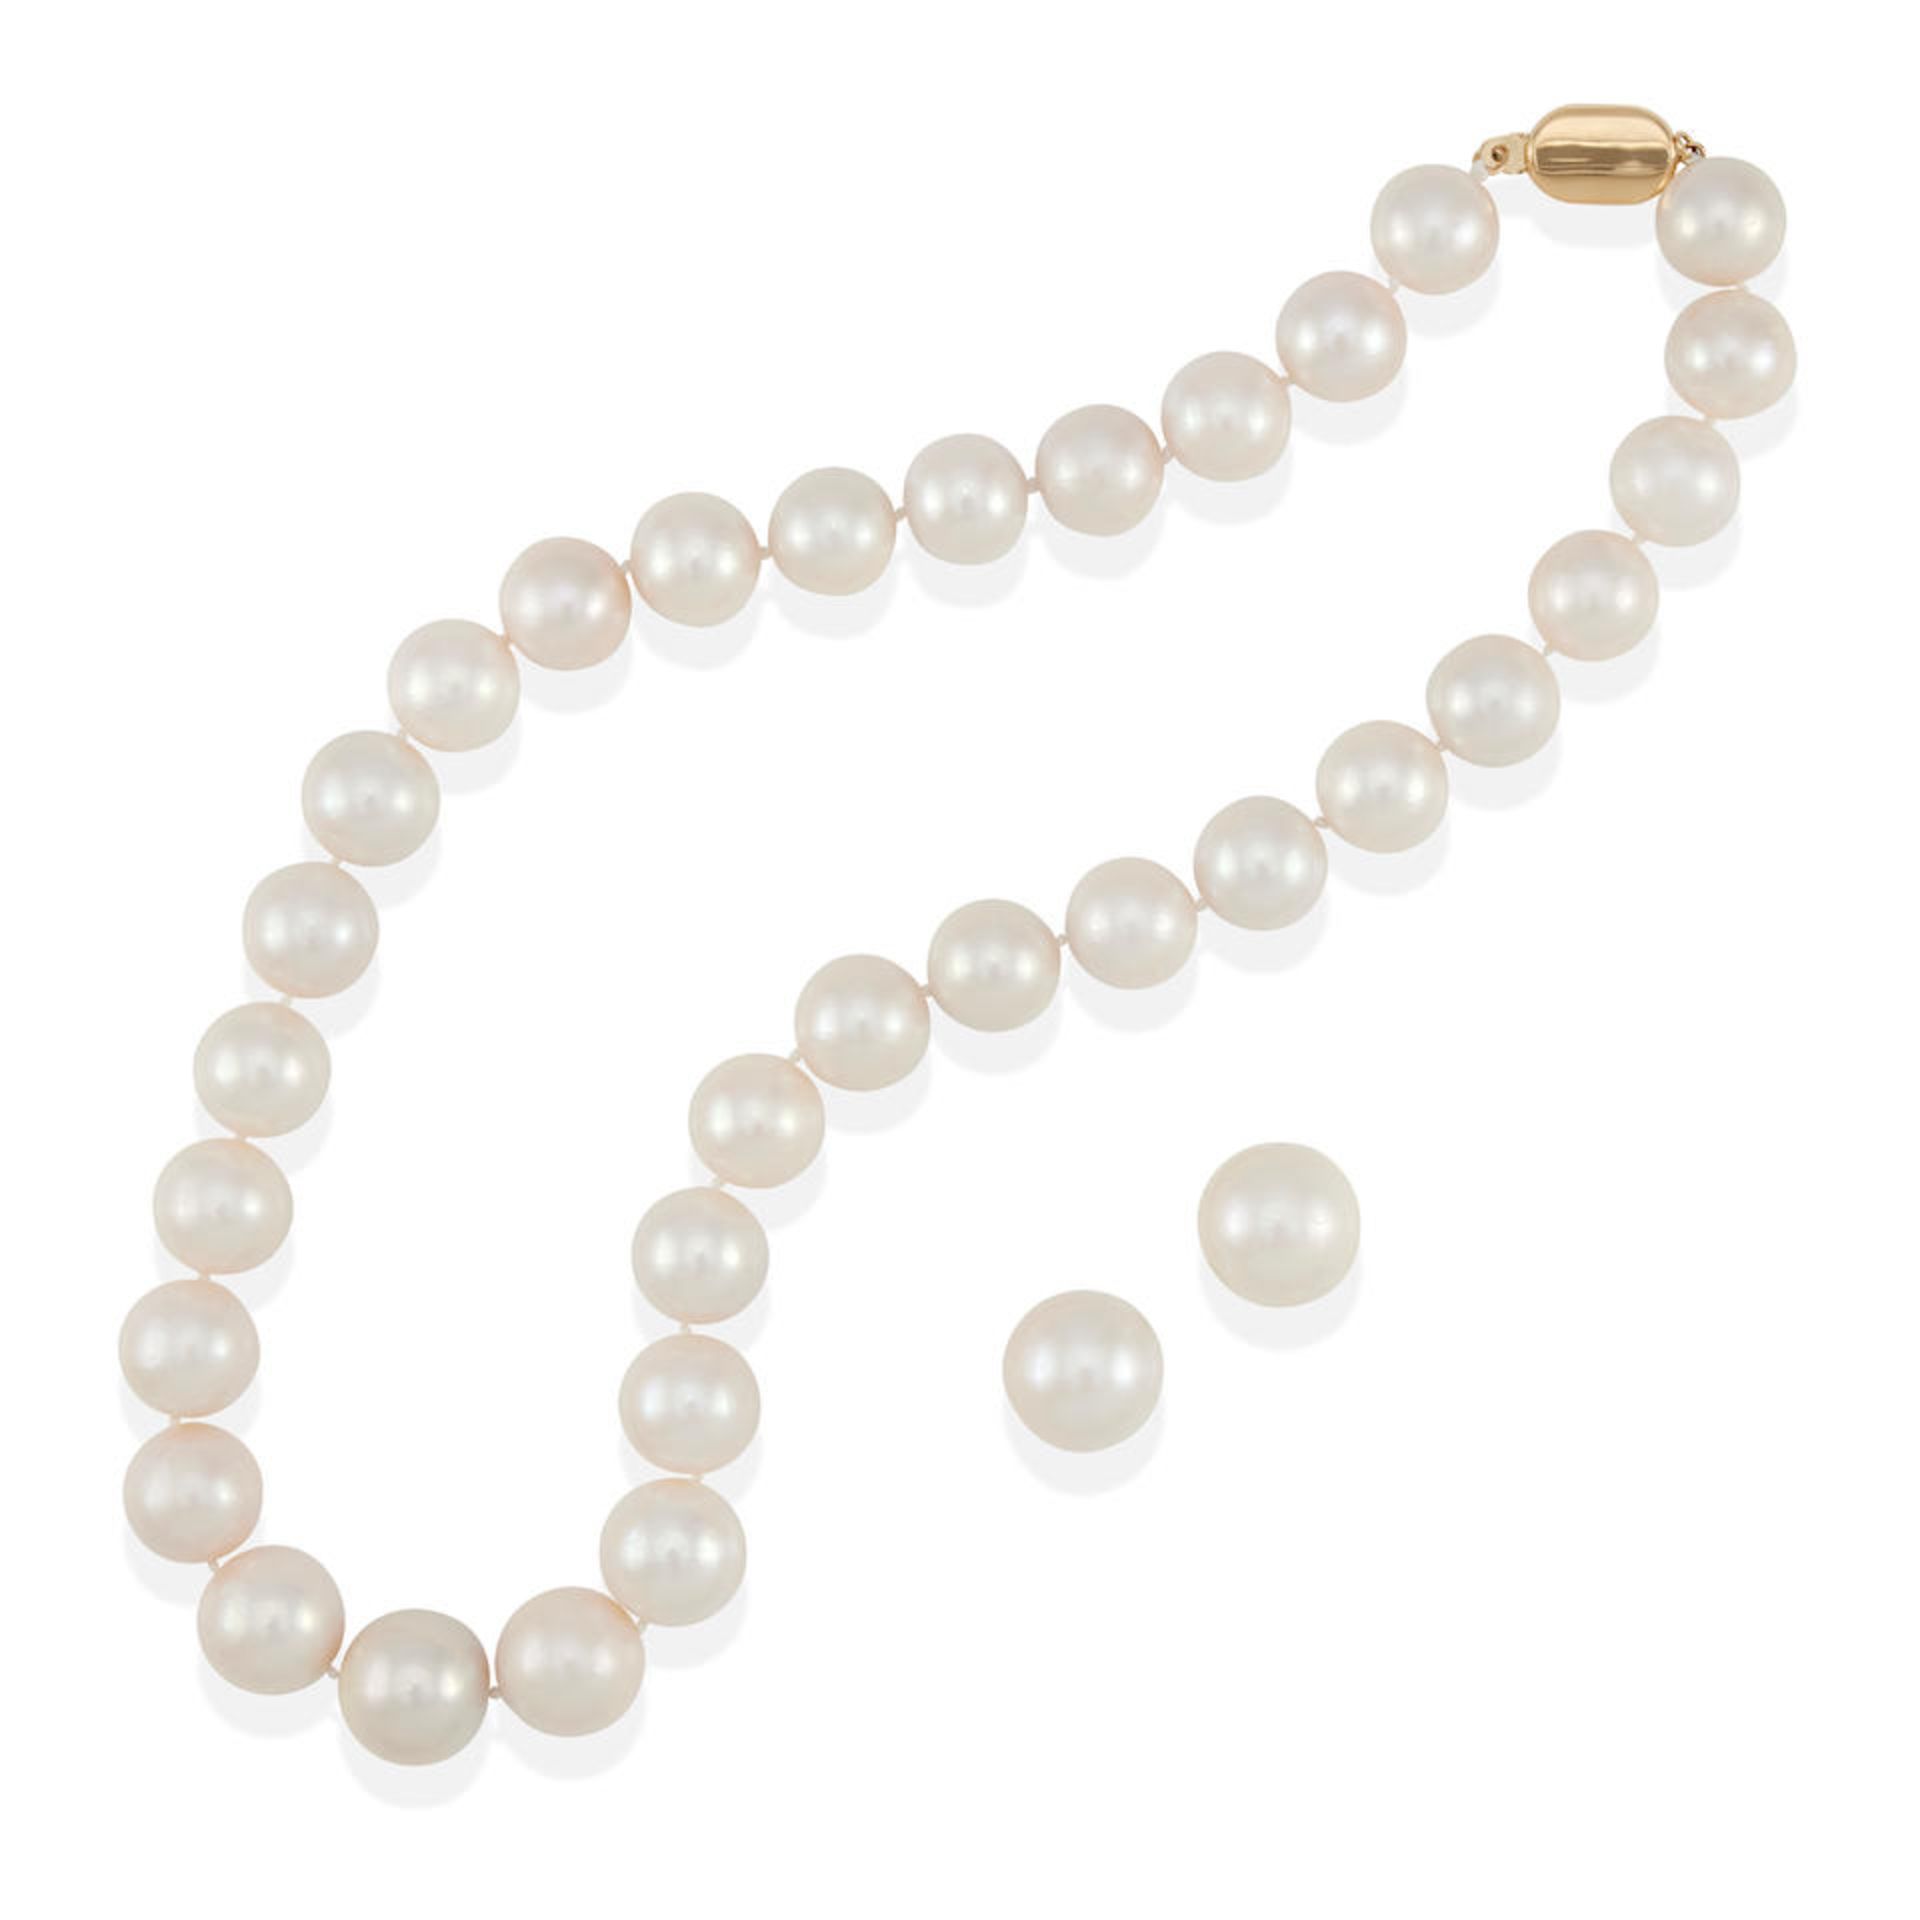 AN 18K GOLD AND CULTURED PEARL NECKLACE AND PAIR OF STUD EARRINGS